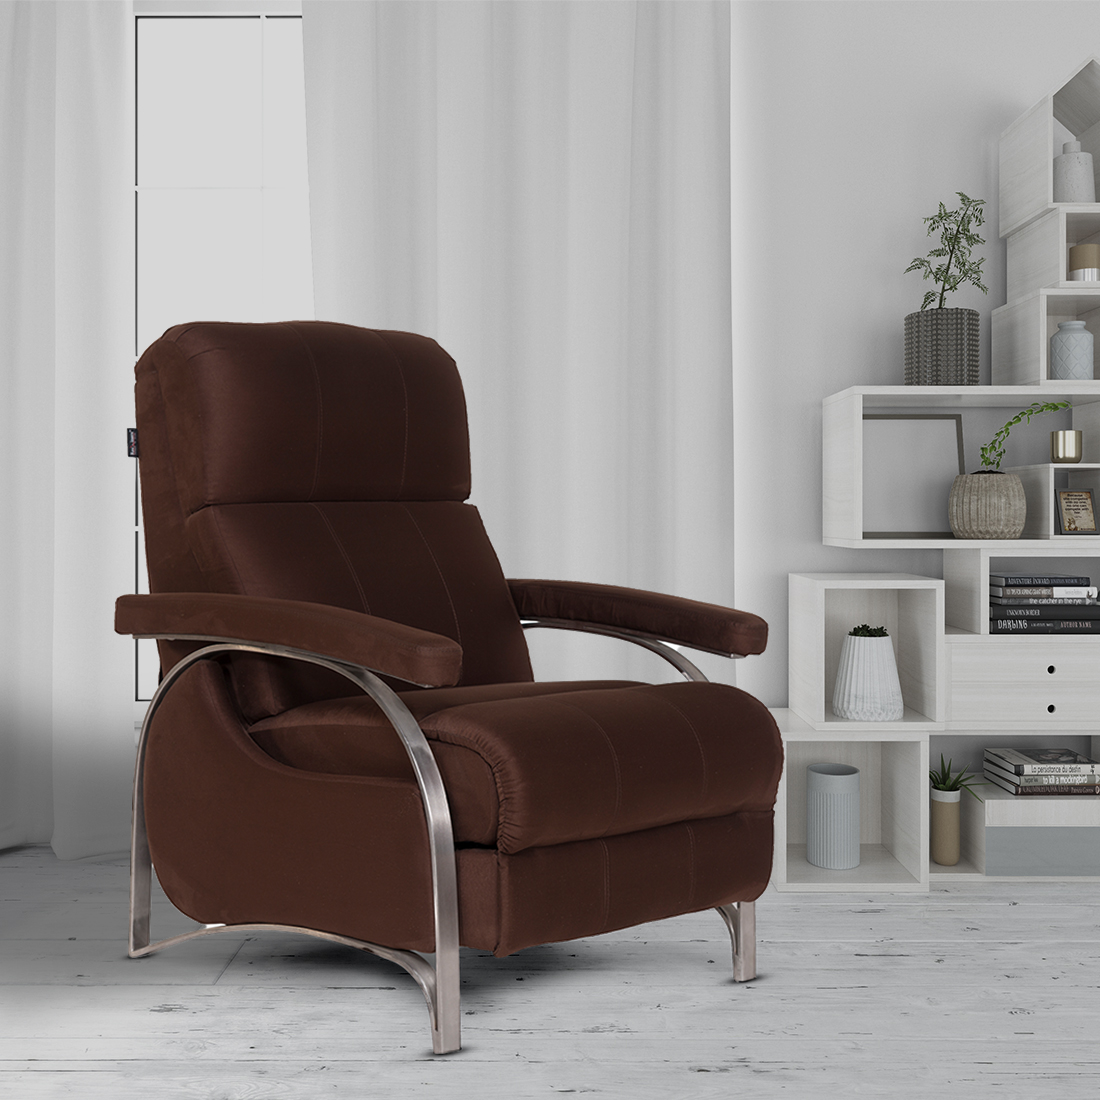 Single Seater Pushback Recliner Chair Style-645